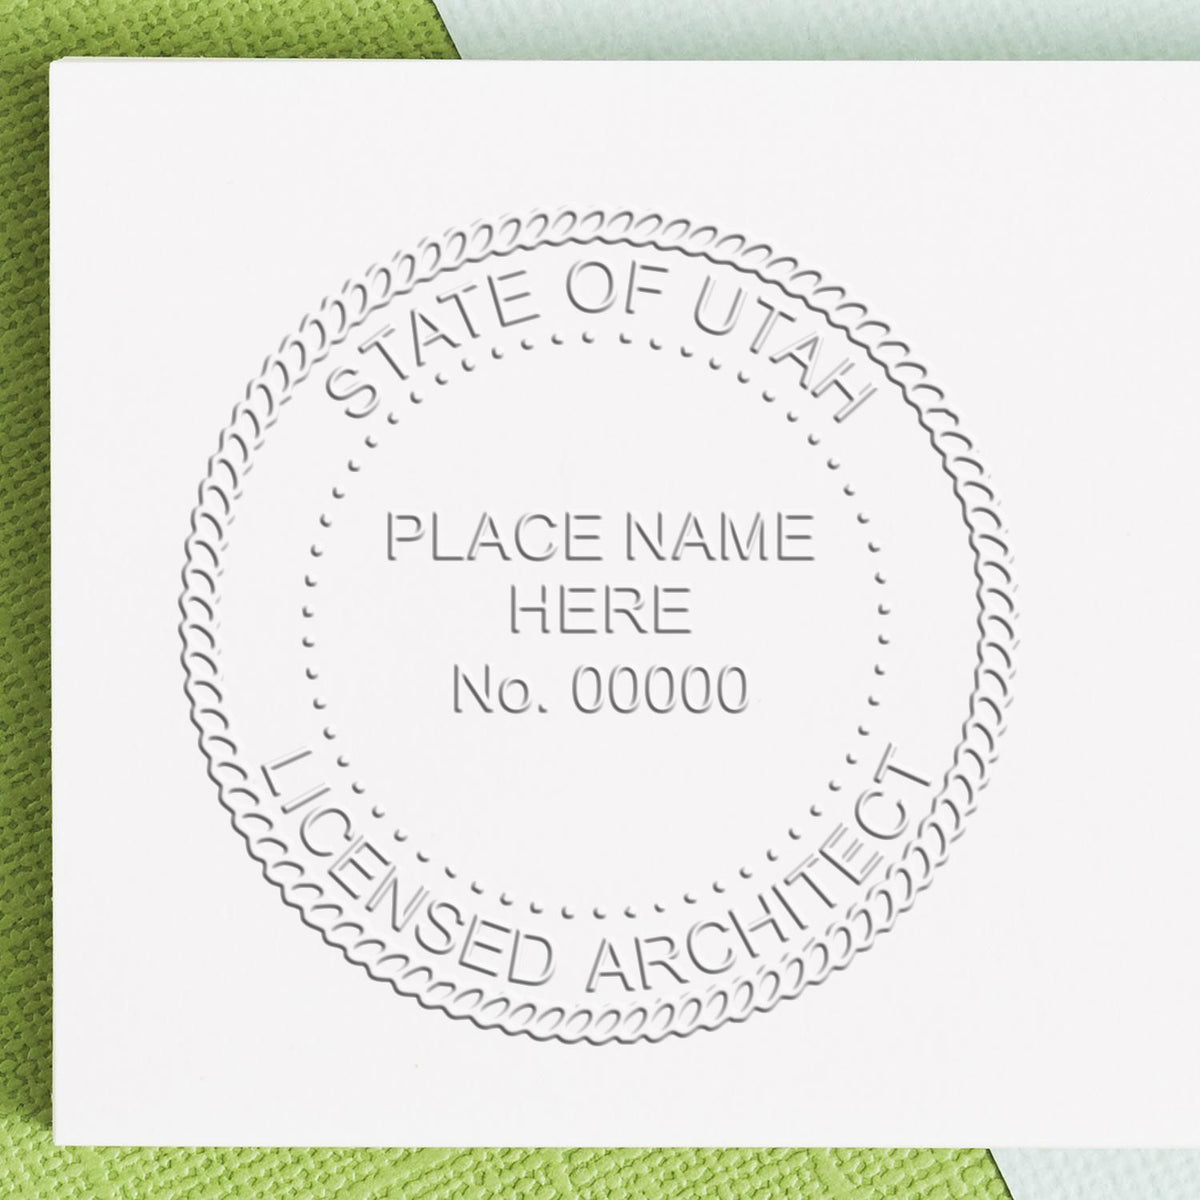 A stamped impression of the Utah Desk Architect Embossing Seal in this stylish lifestyle photo, setting the tone for a unique and personalized product.